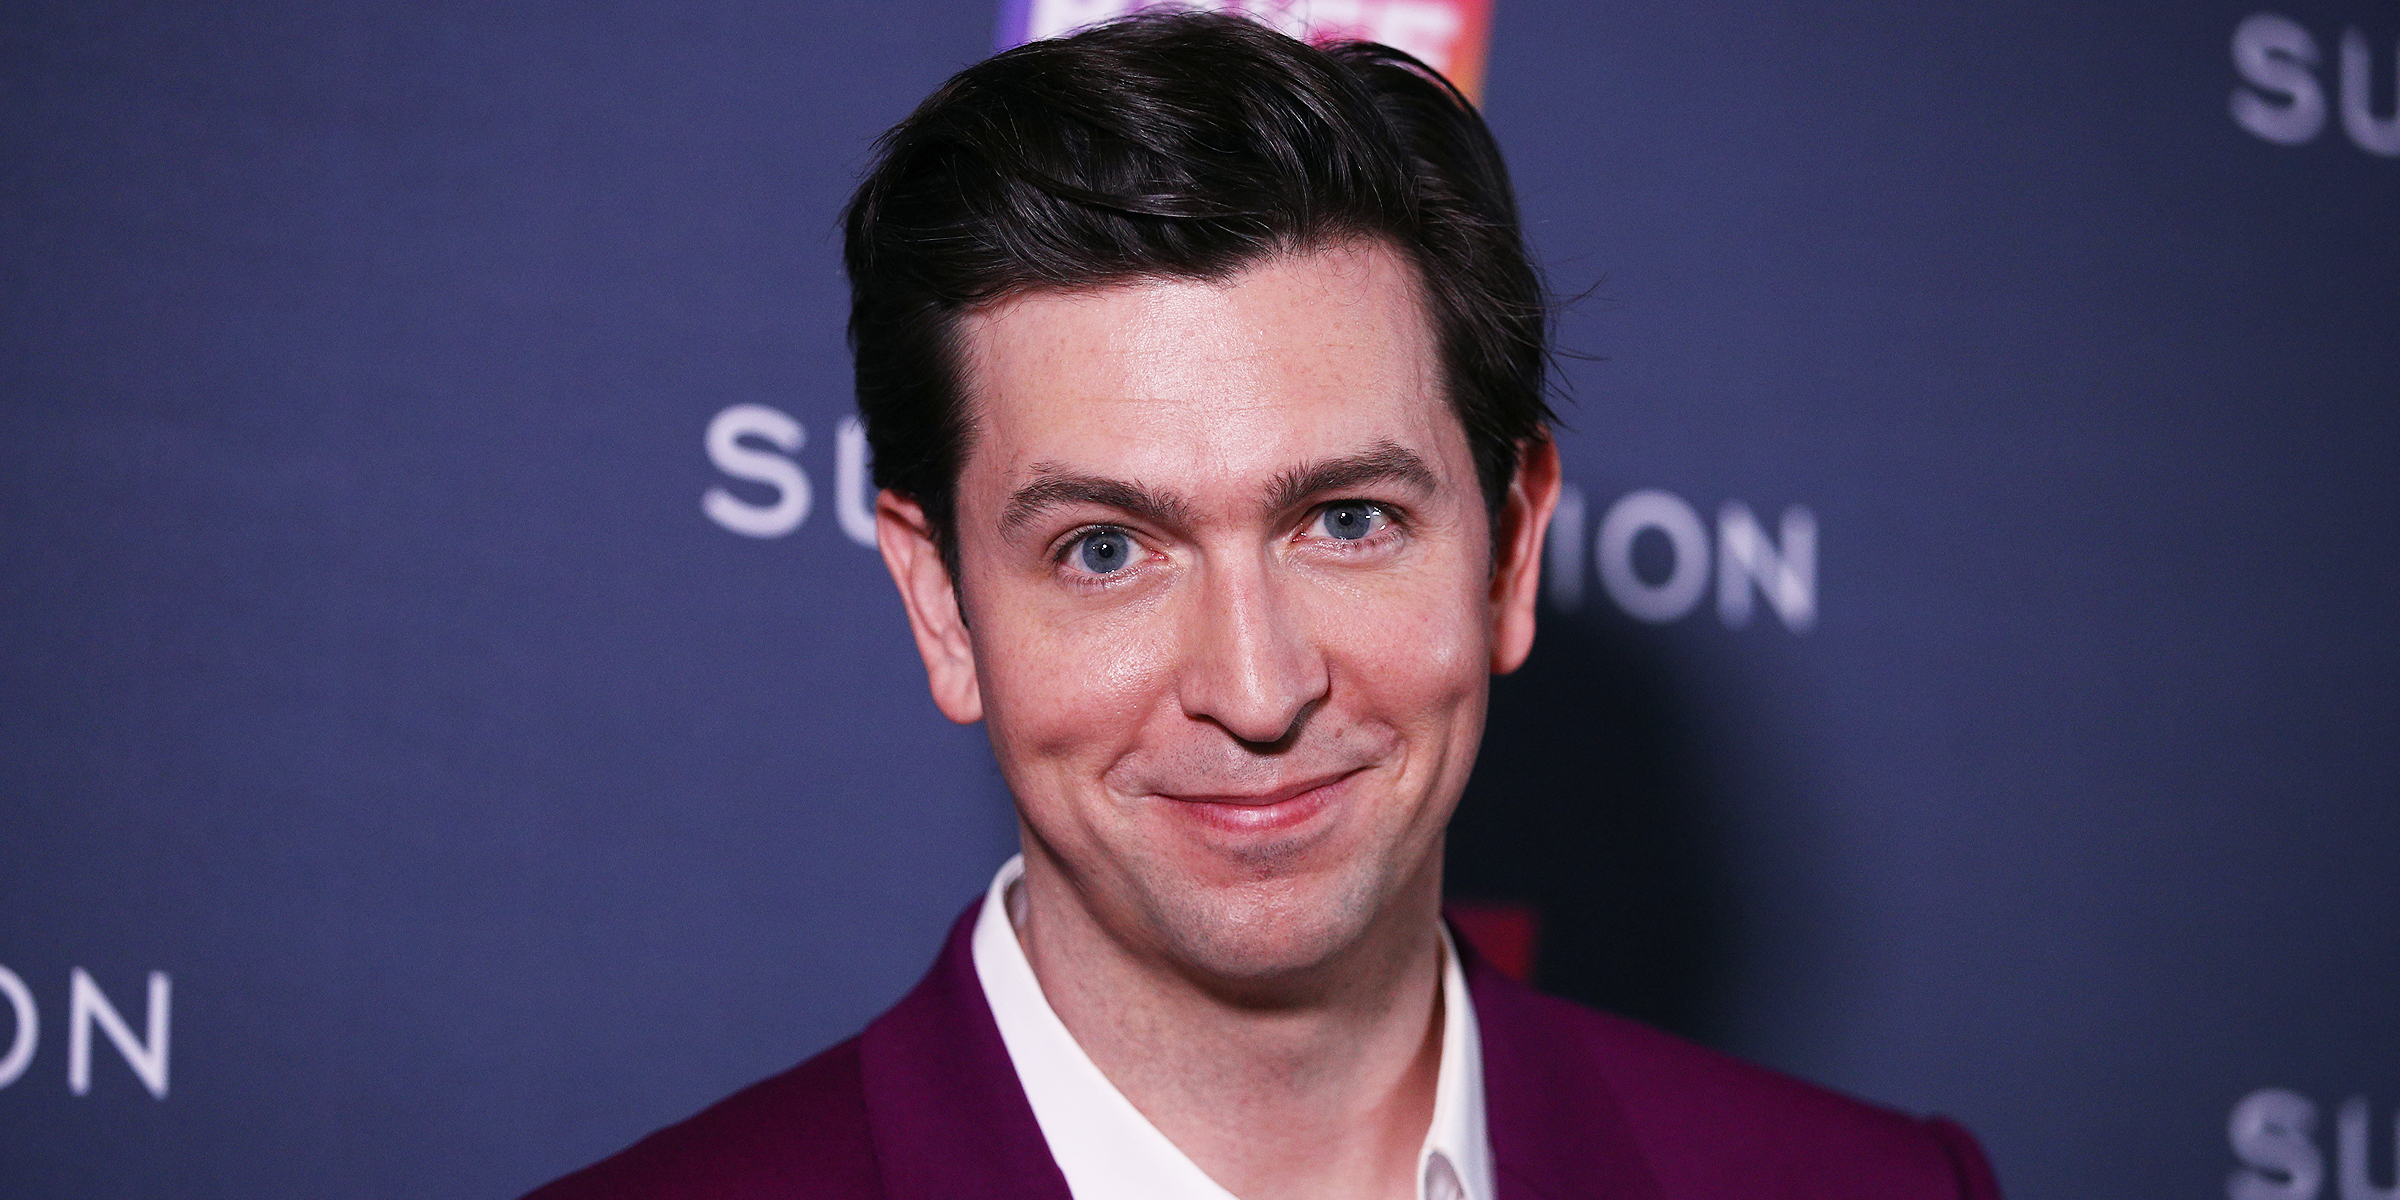 Is Nicholas Braun Gay or Straight? He Has Spoken about Dating Women